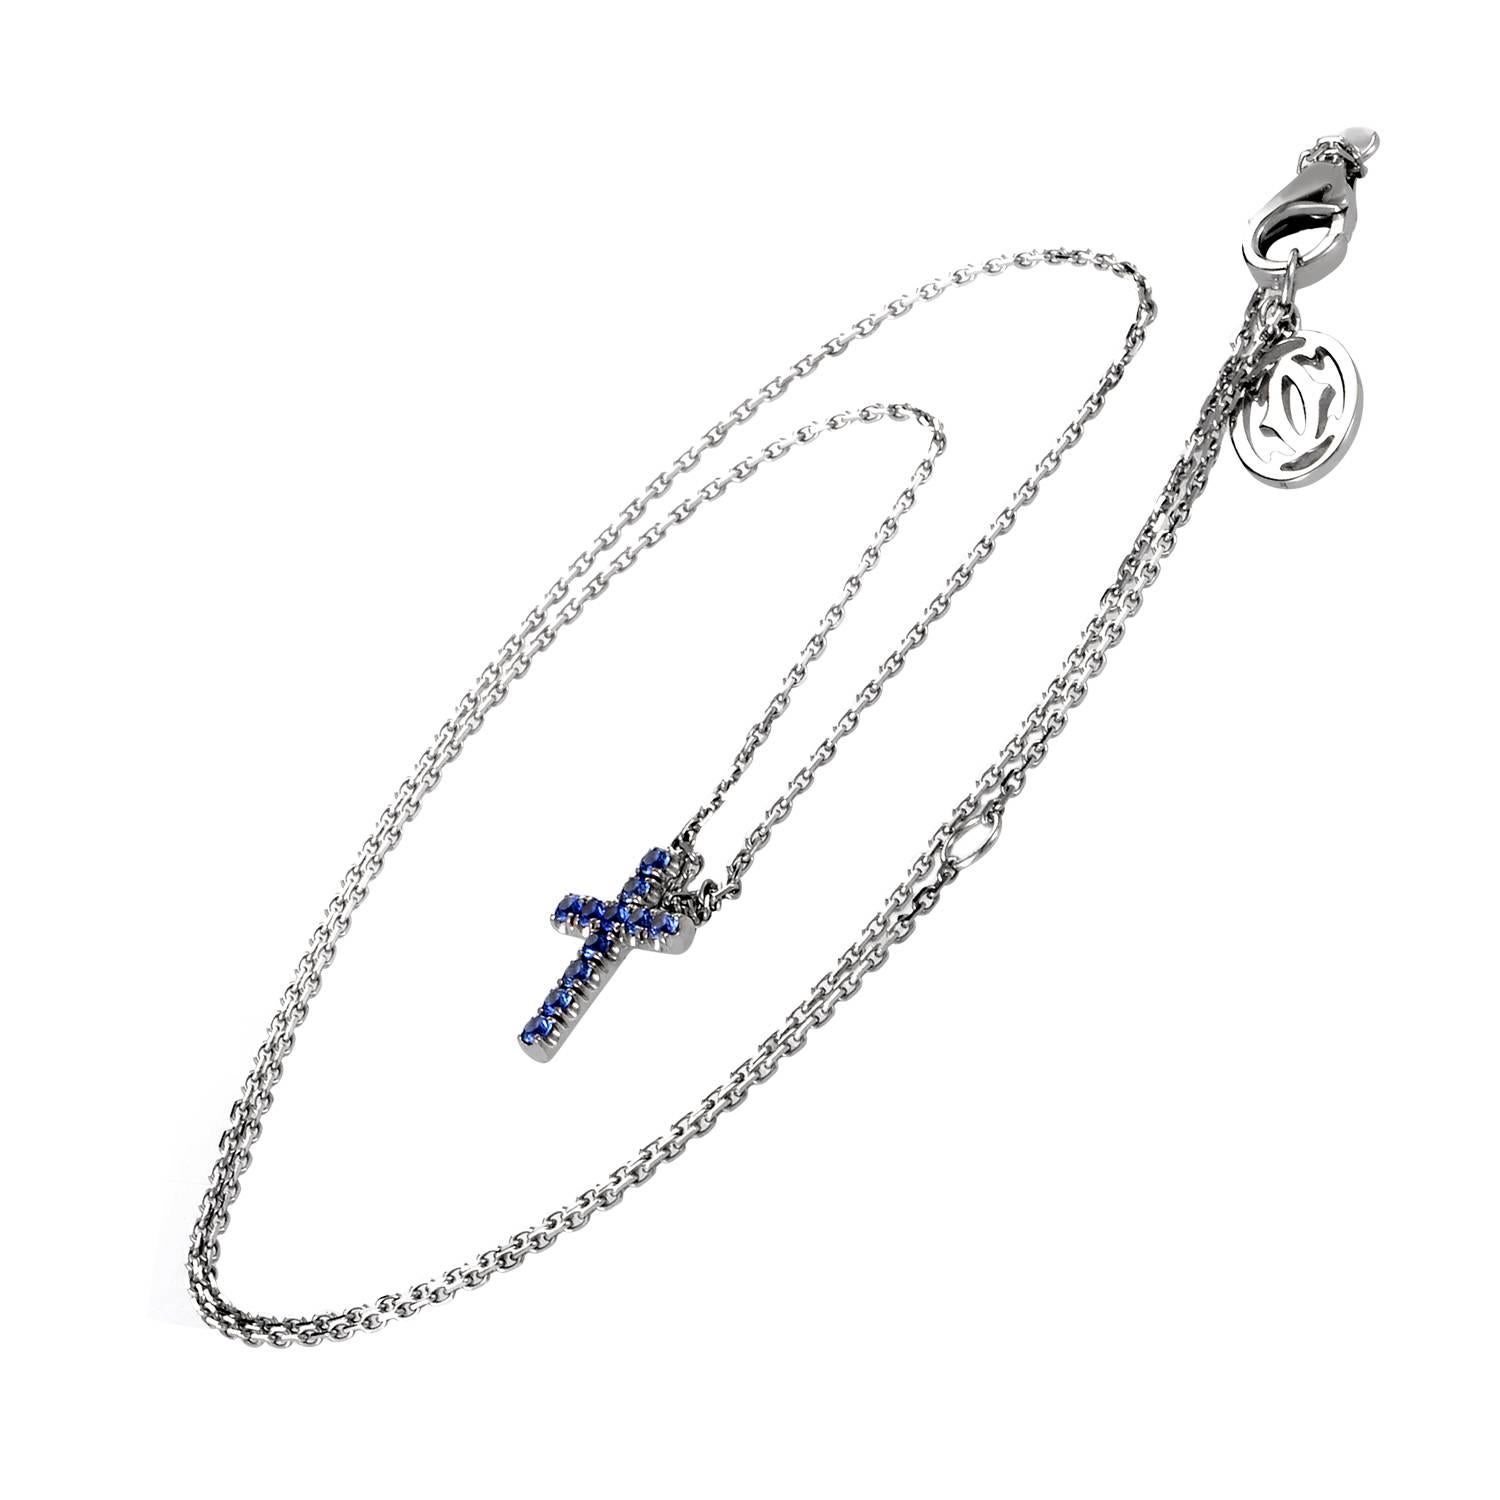 A cross motif retains a stoic dignity while getting the perfect sprinkling of precious stones to exemplify the Cartier standard of taste and luxury. Rendered from 18K white gold, this classic symbol of strength, hope and faith this pendant shimmers